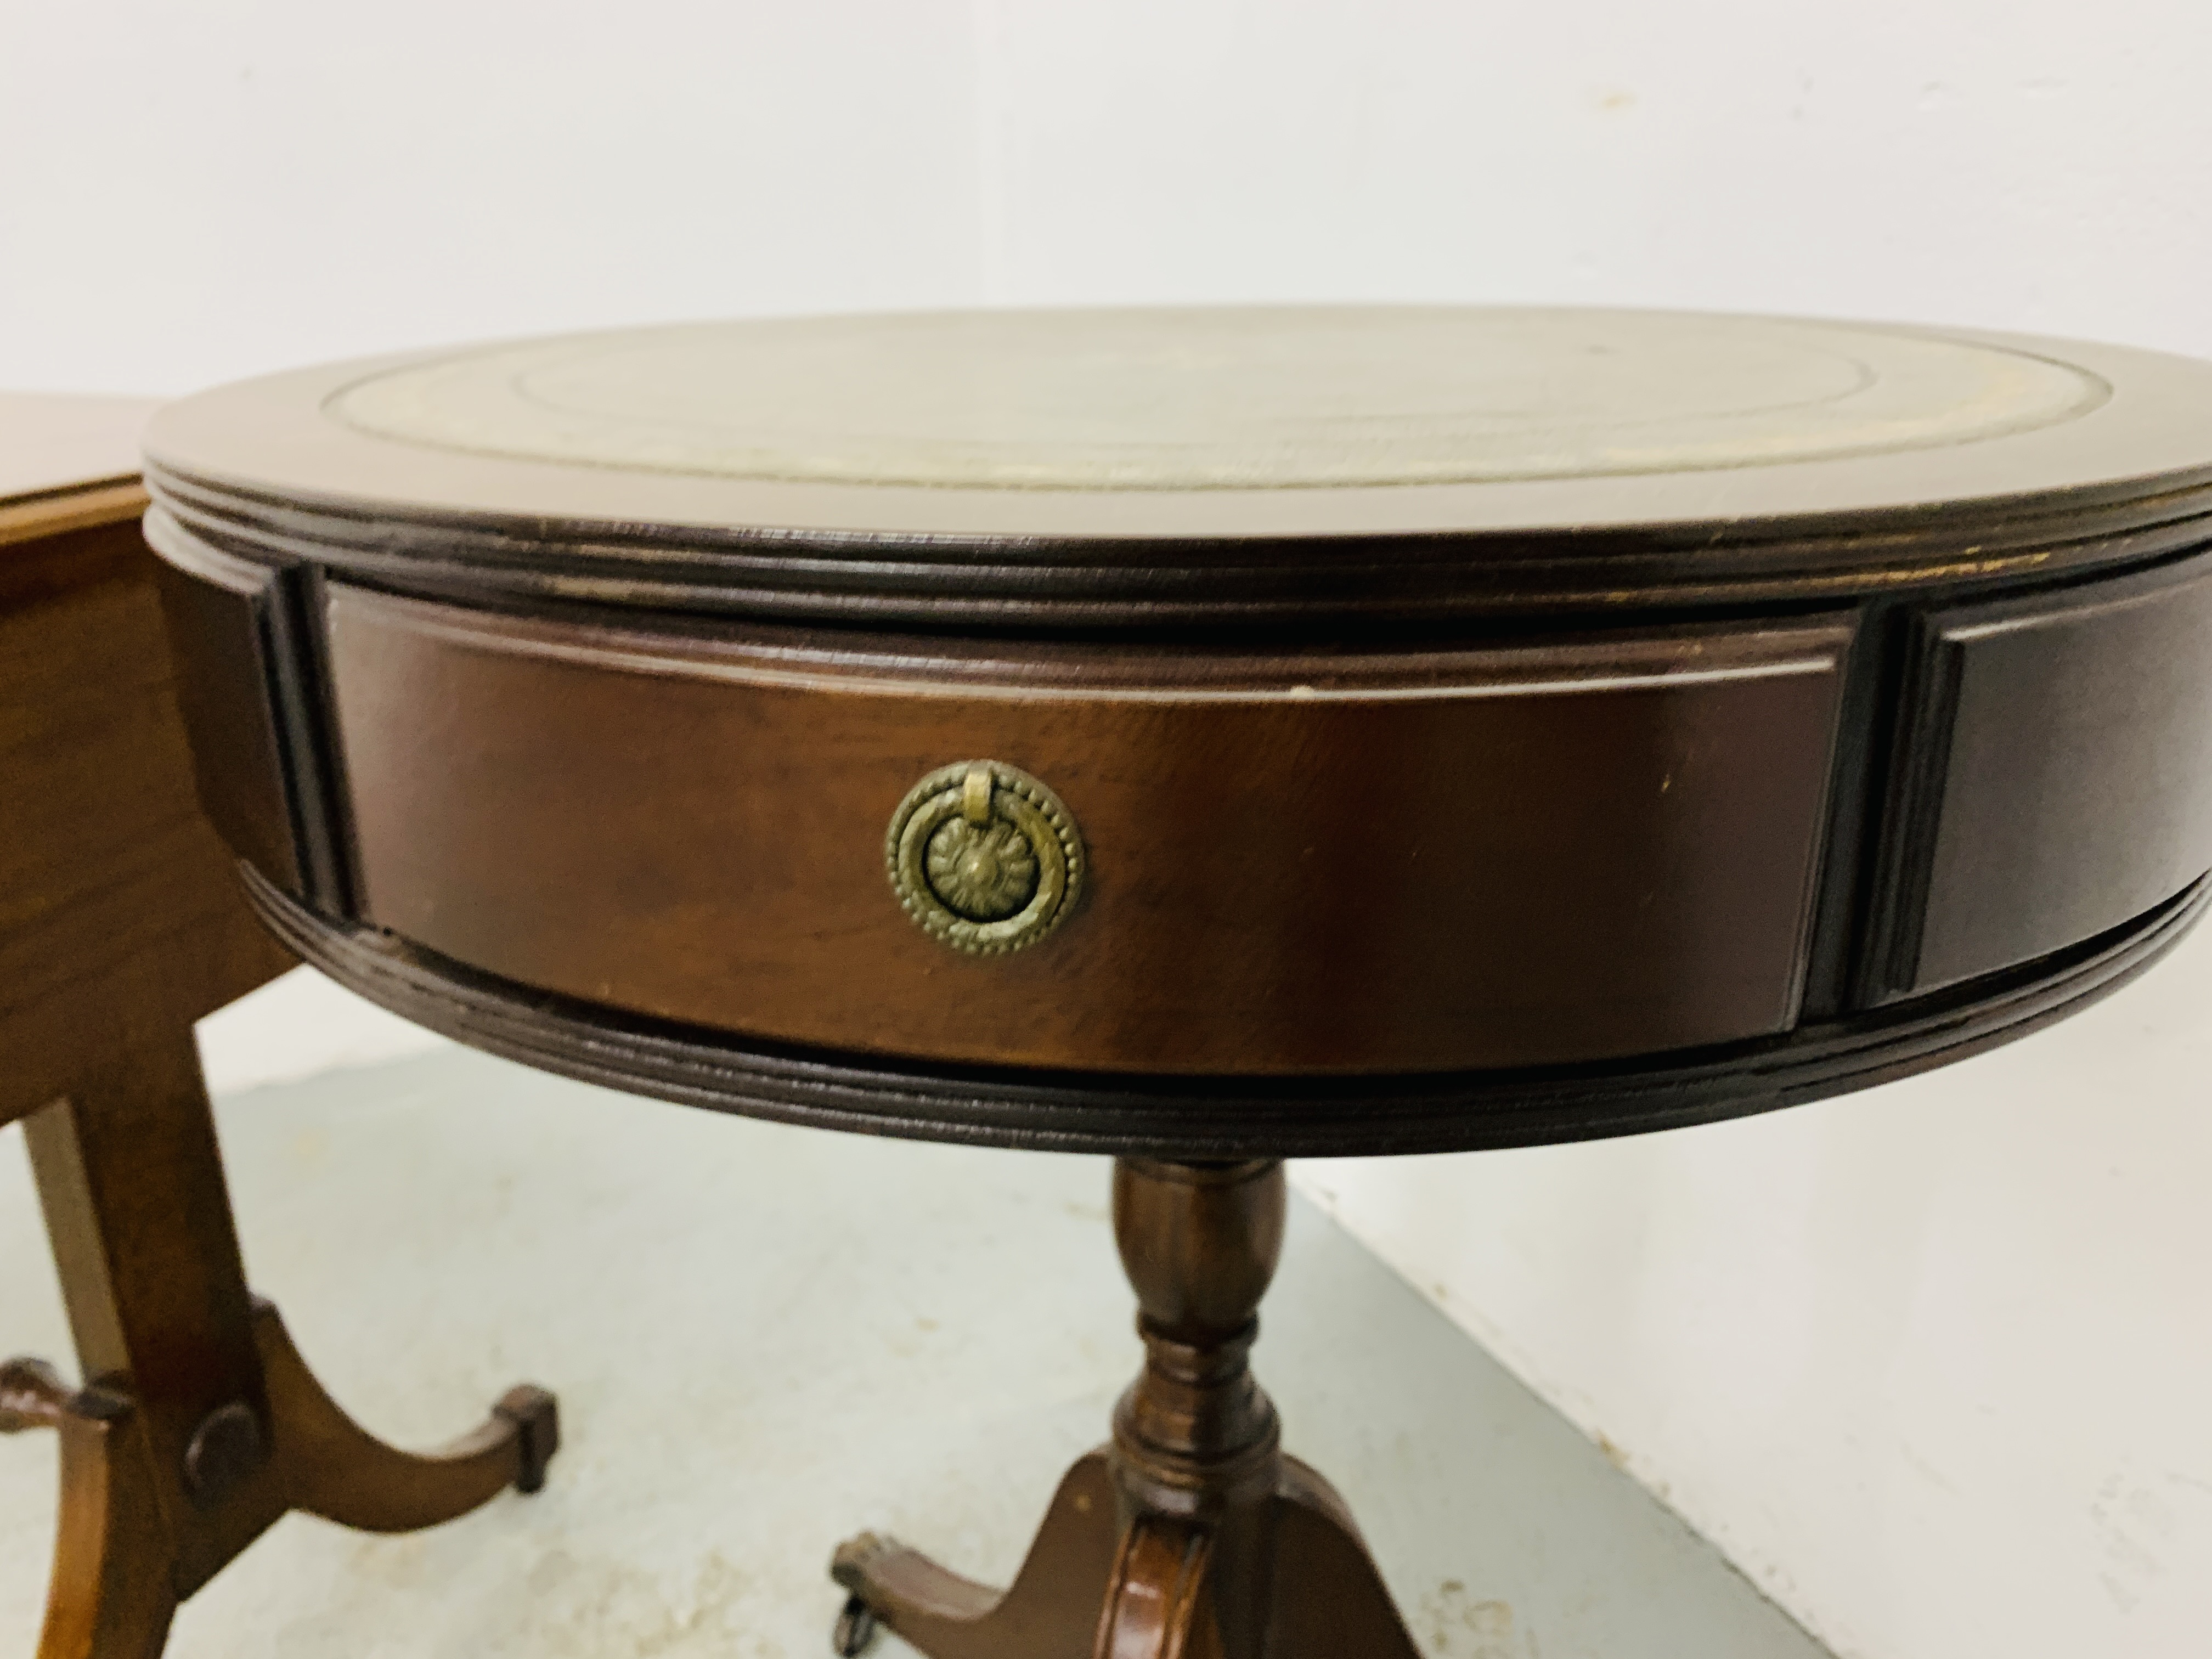 A REPRODUCTION DROP FLAP SINGLE DRAWER OCCASIONAL TABLE AND REPRODUCTION MAHOGANY FINISH PEDESTAL - Image 6 of 9